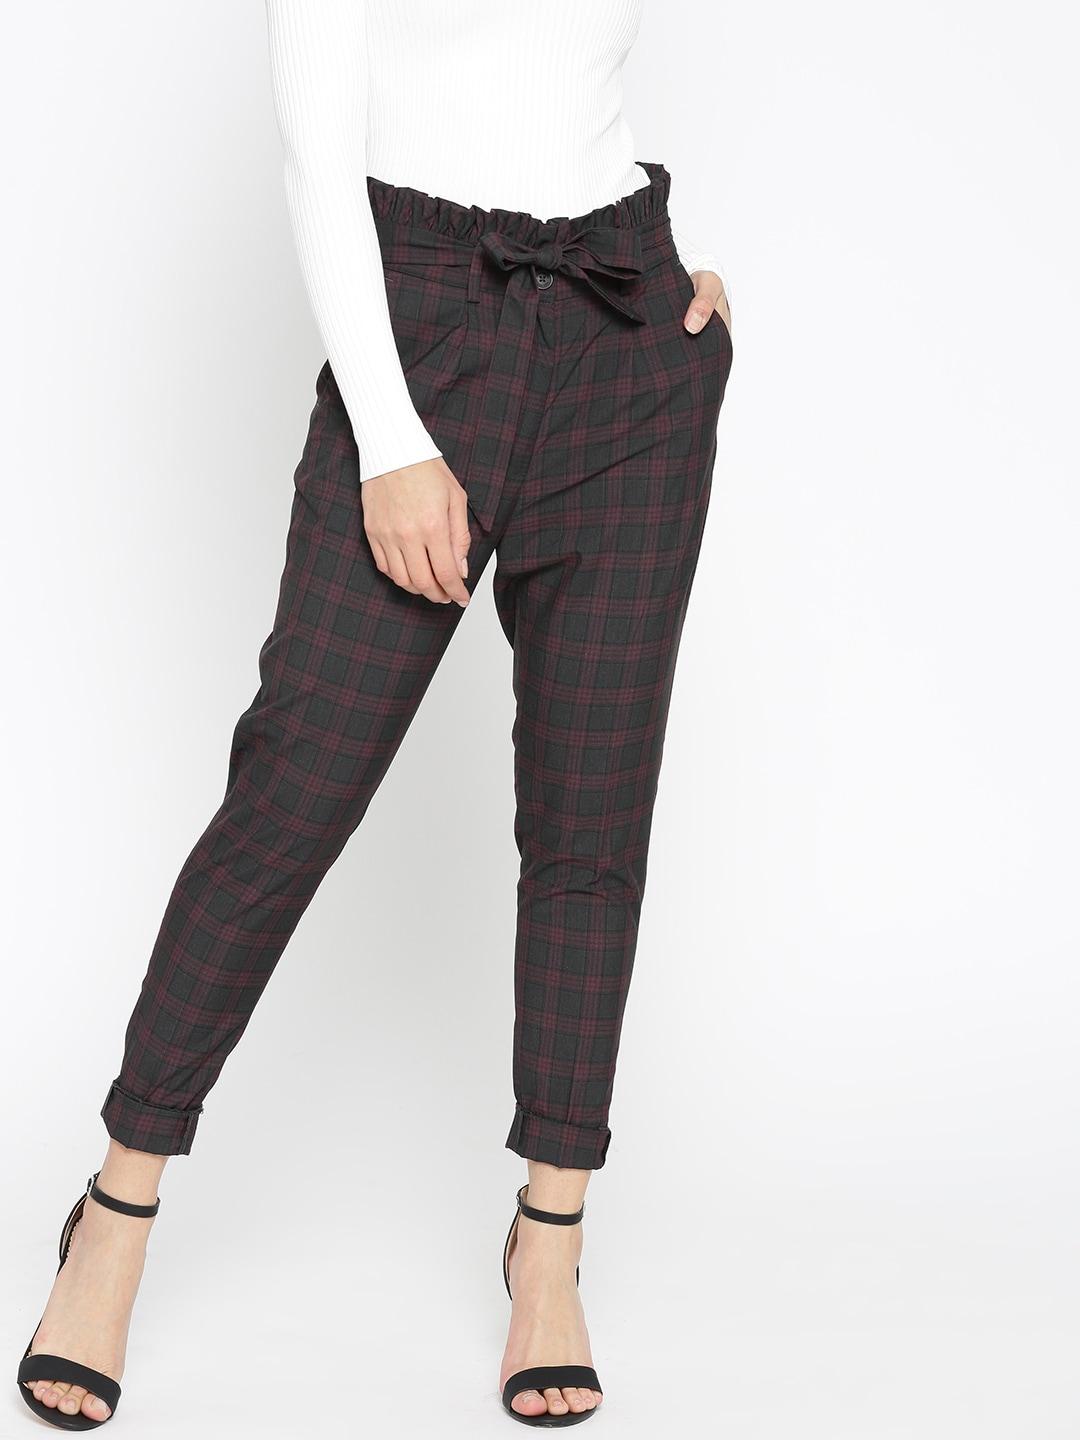 park avenue women charcoal grey & maroon tapered fit checked peg trousers